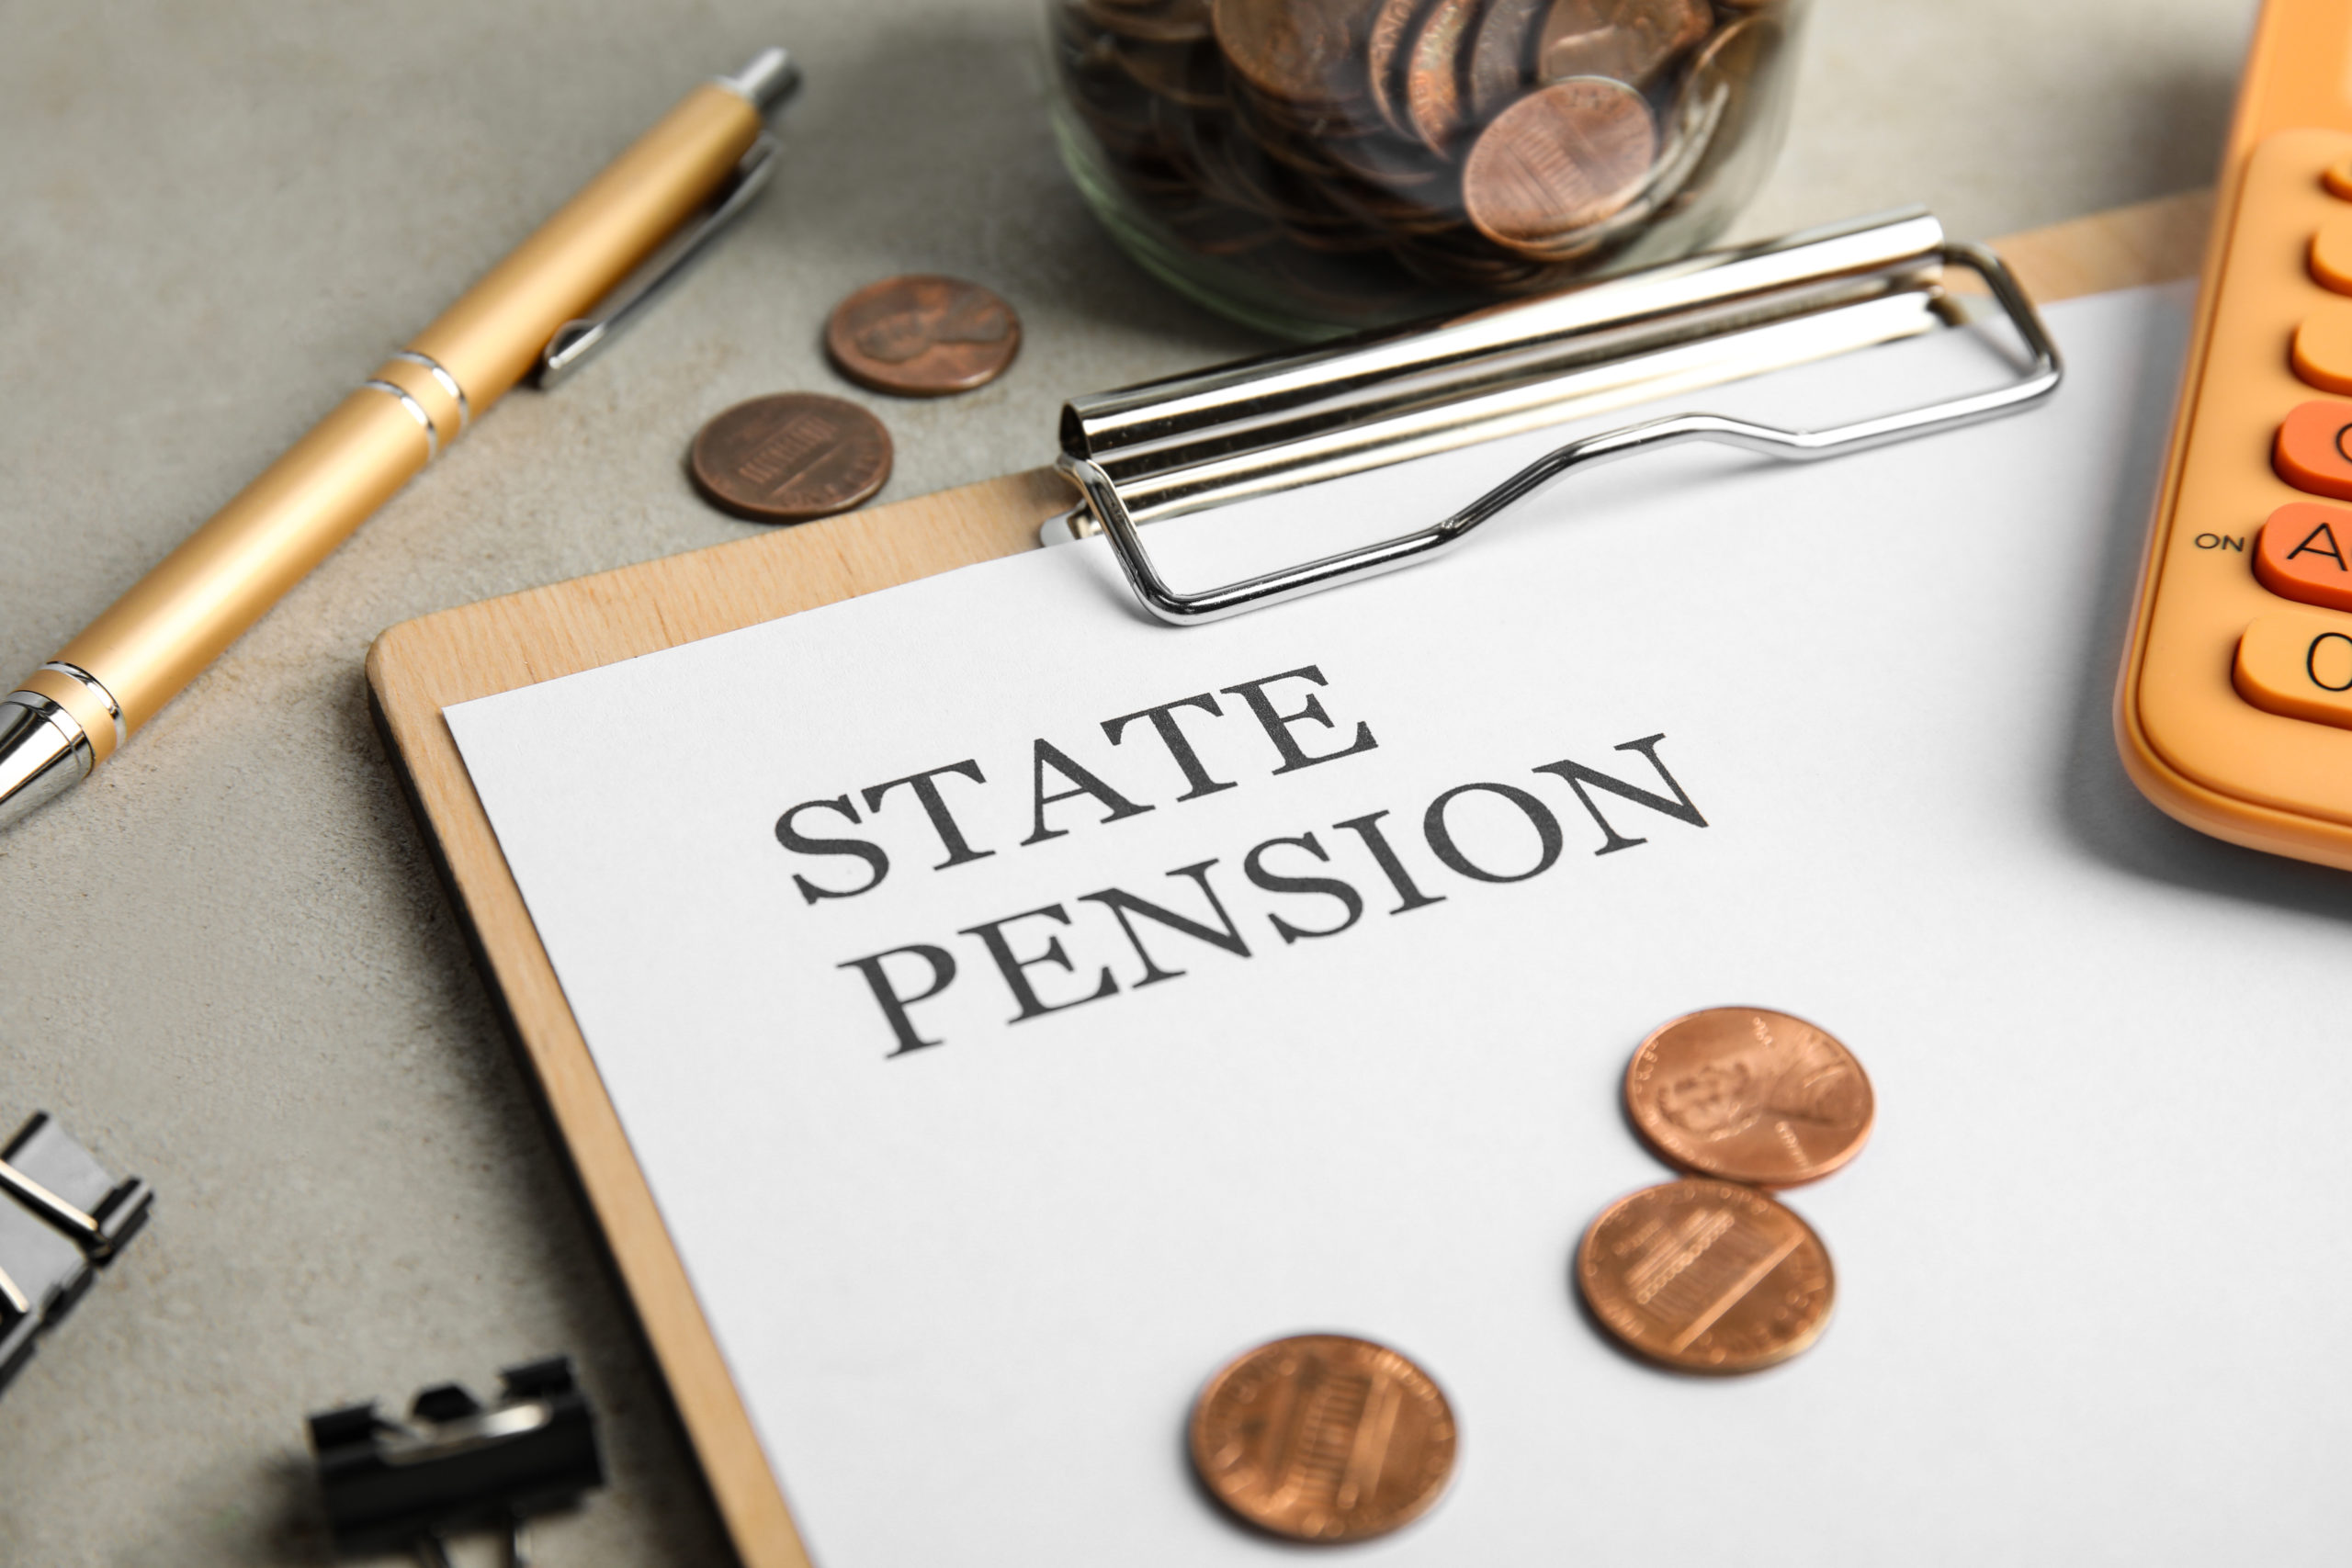 Pension Reform Newsletter: New Mexico Pension Solvency, California’s Green Bonds, and More